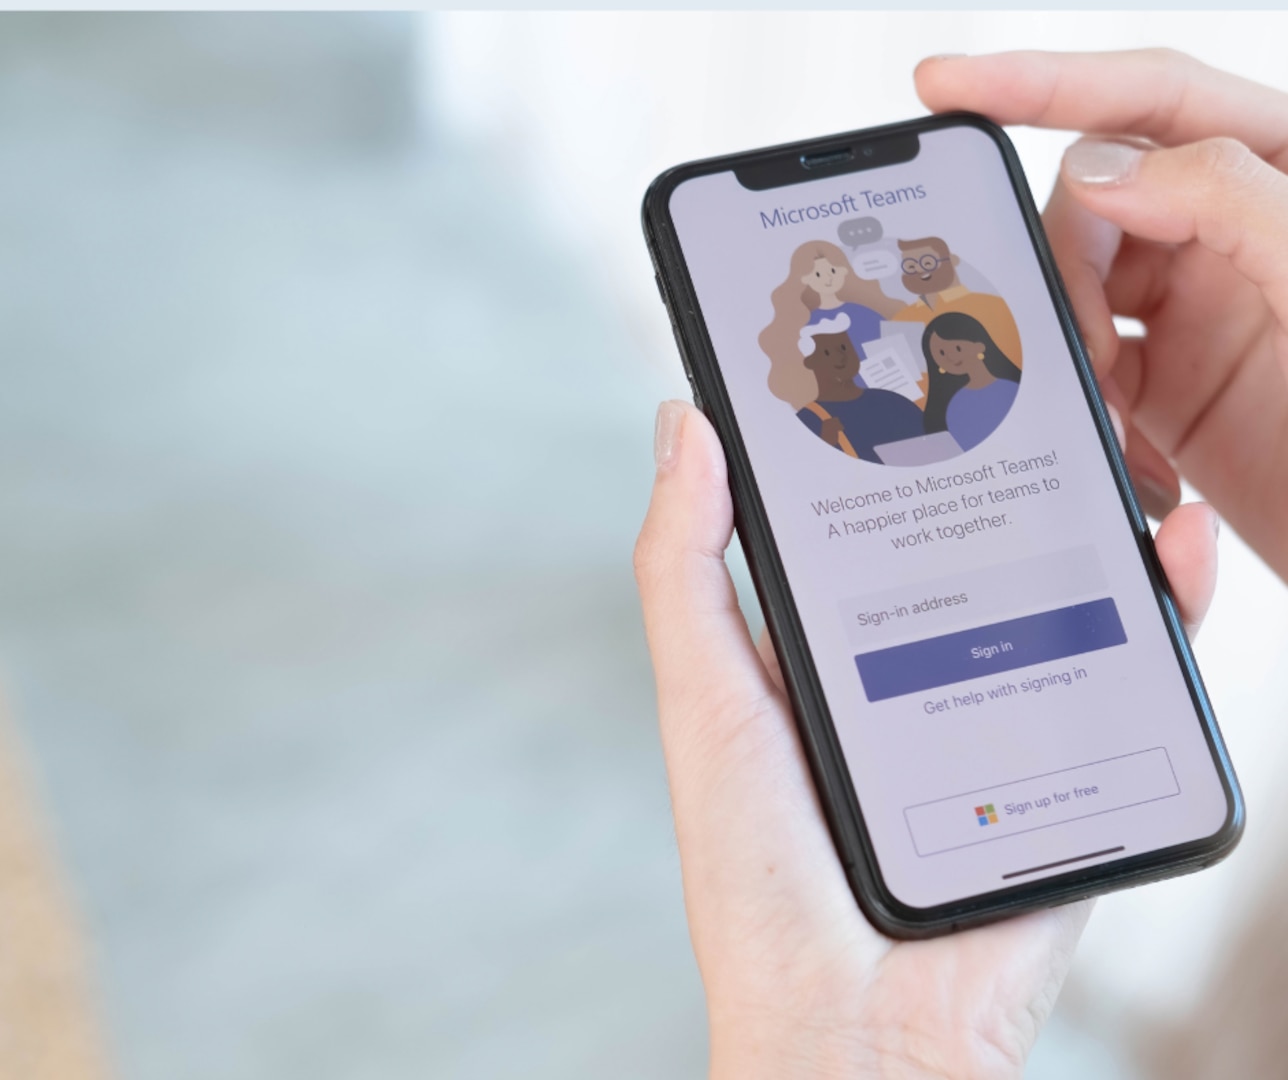 Hand holding mobile phone, screen showing Microsoft Teams application login